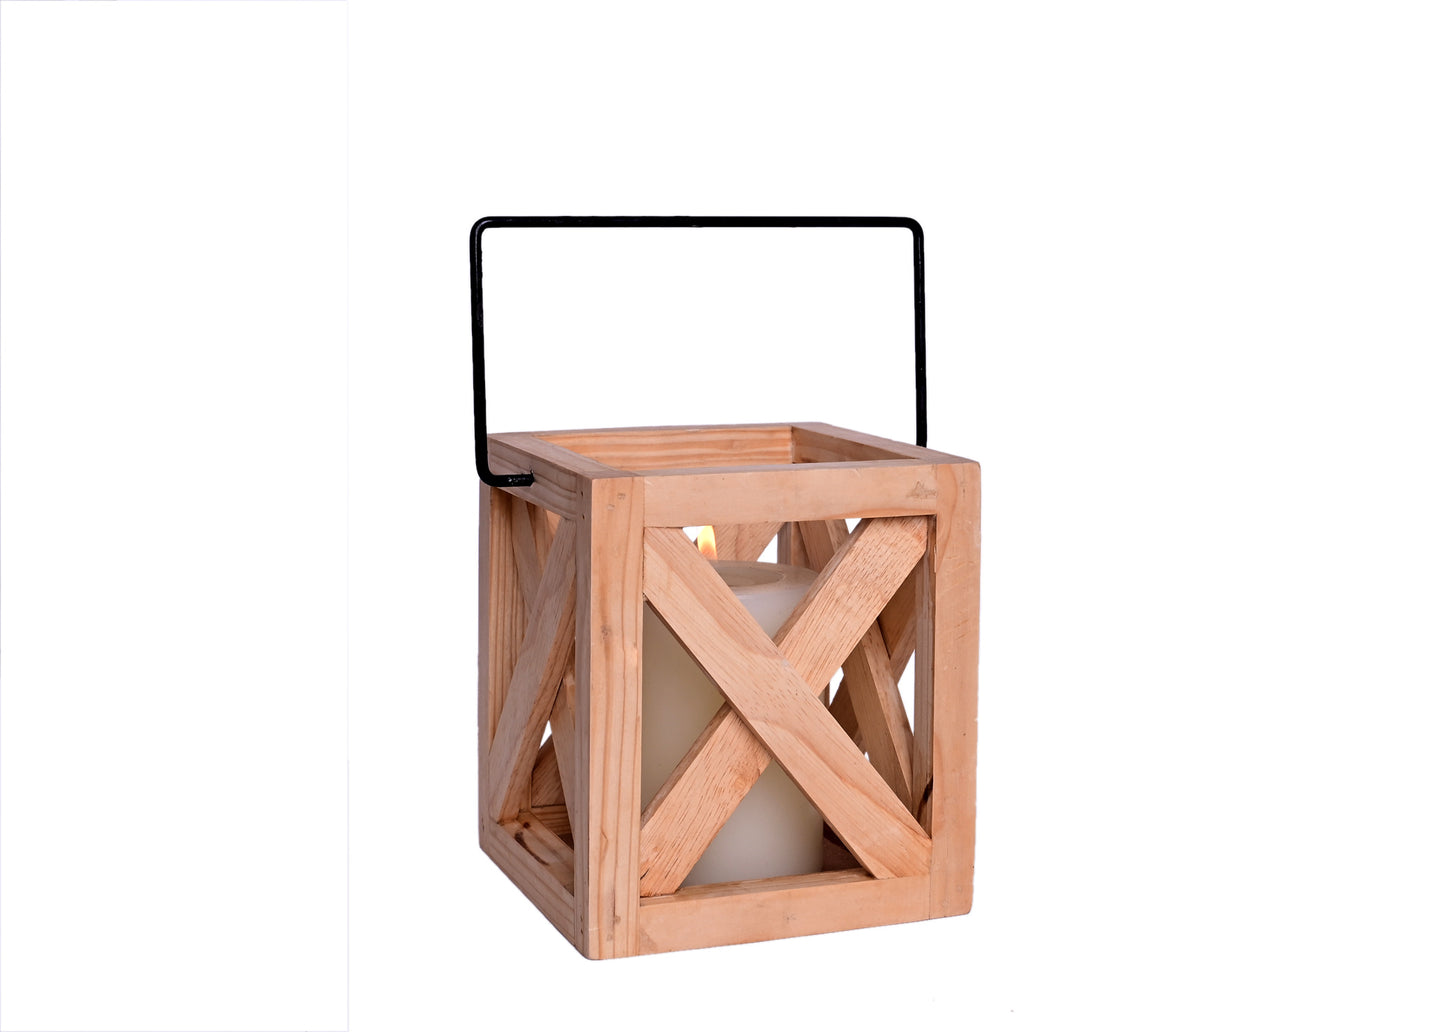 The Weaver's Nest  Wooden Hanging Lantern with Glass Jar Candle for Home Decoration/ Festival Decor (Brown, 13 X 13 X 24 cm)